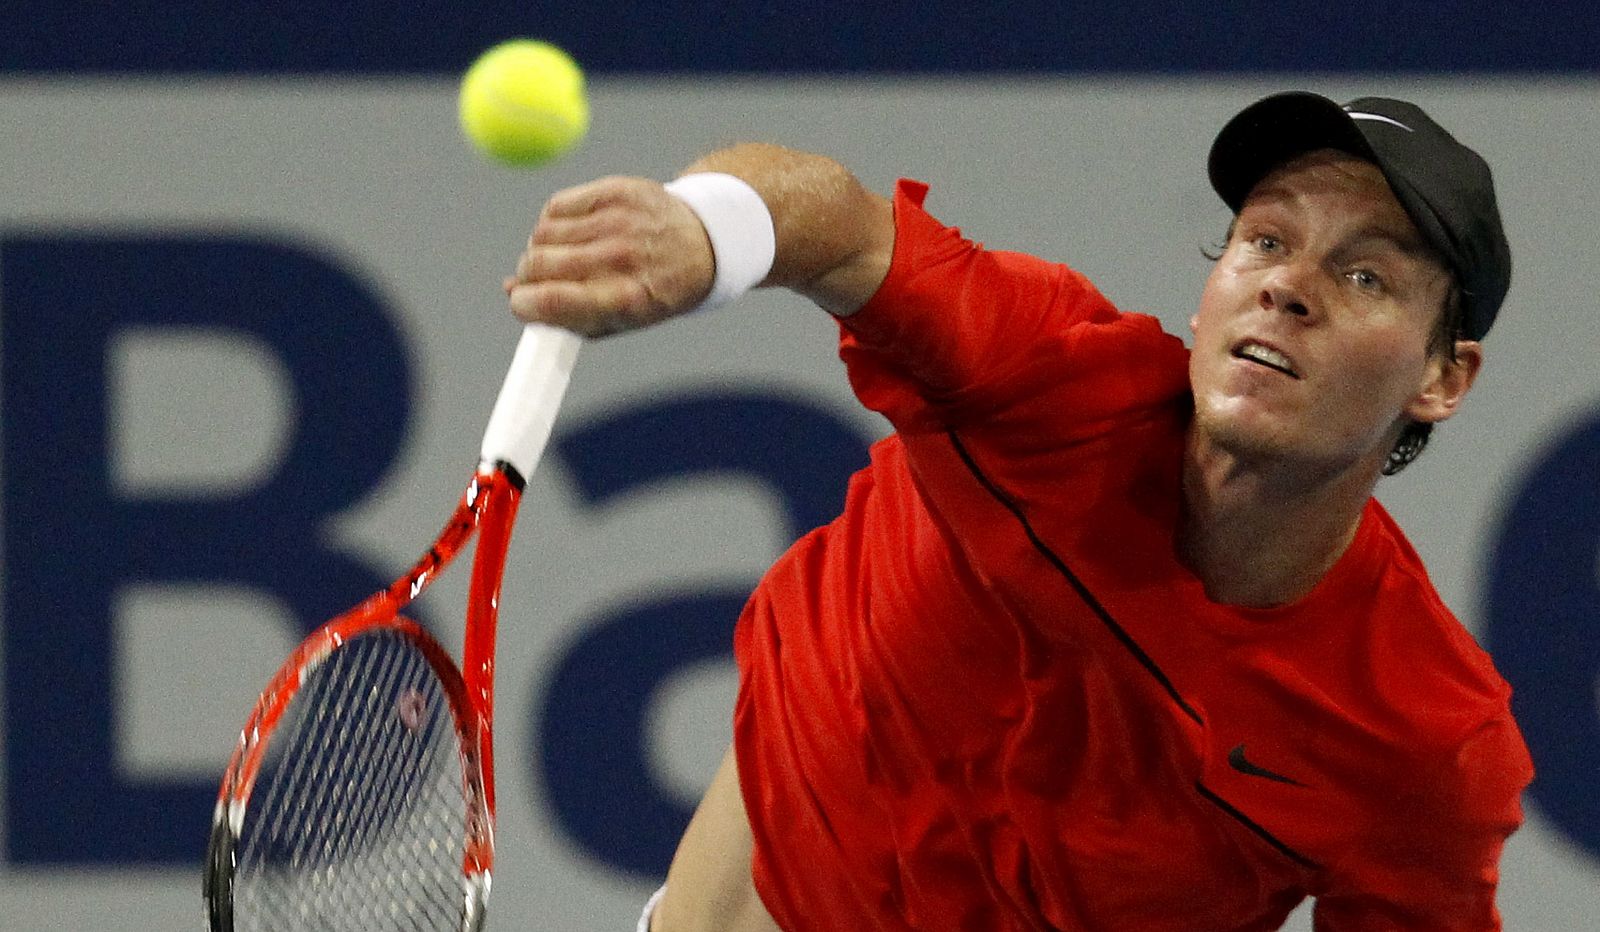 Berdych of Czech Republic looks at the ball as he serves to Japan's Nishikori during their match at the Swiss Indoors ATP tennis tournament in Basel